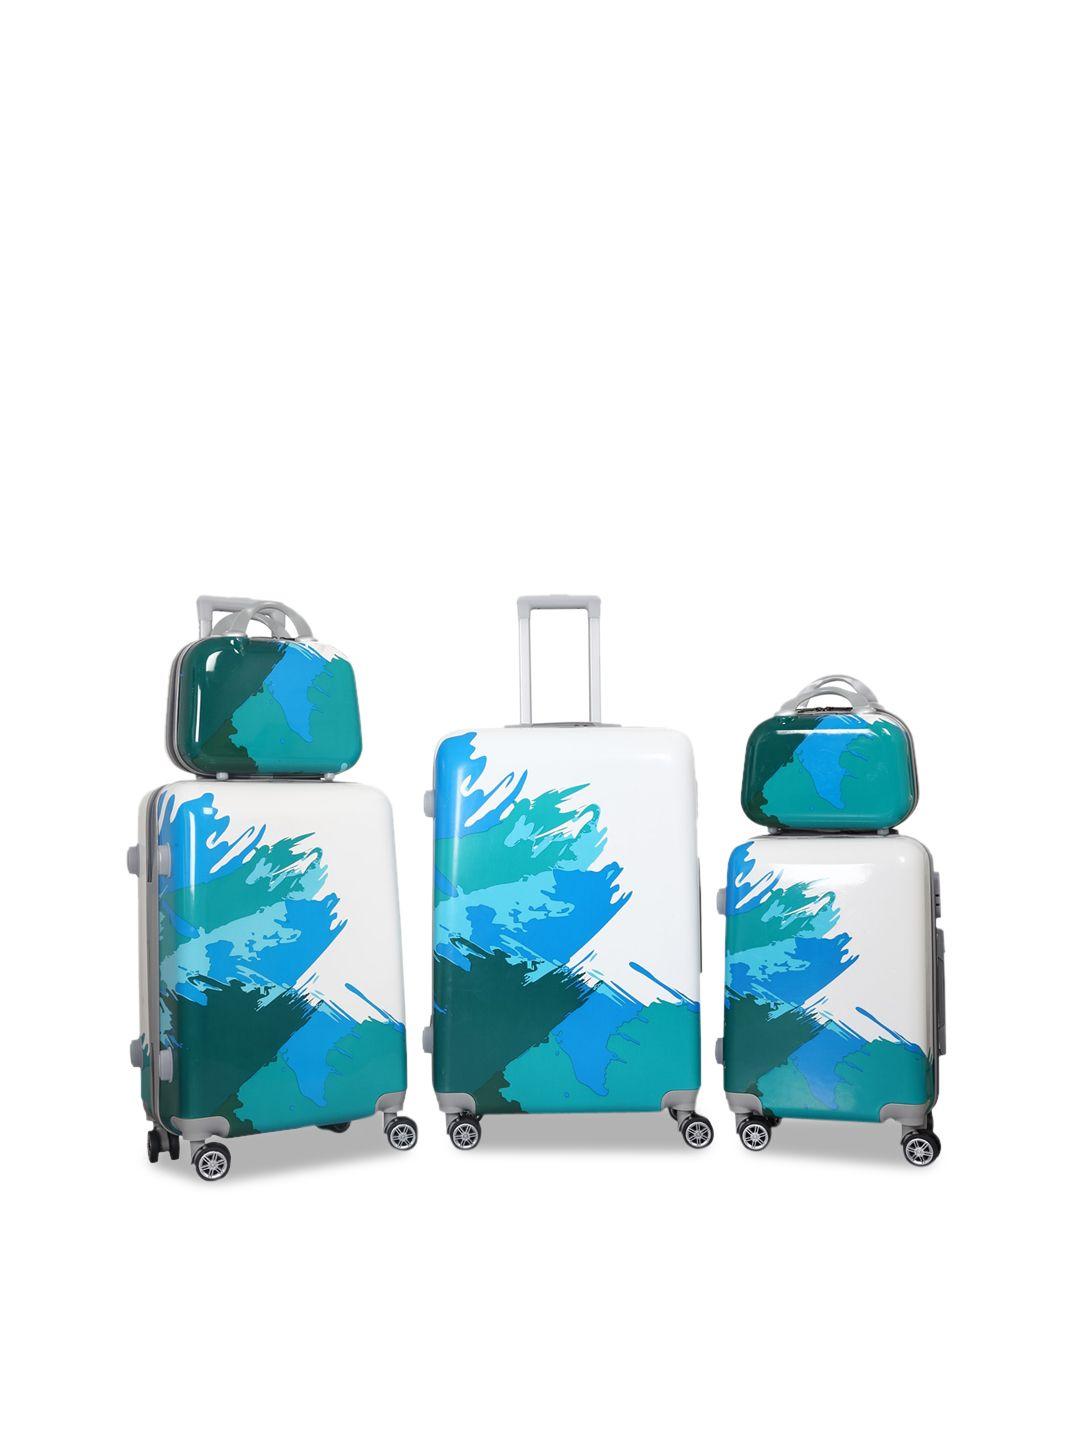 polo class set of 5 blue & green printed hard-sided trolley suitcases